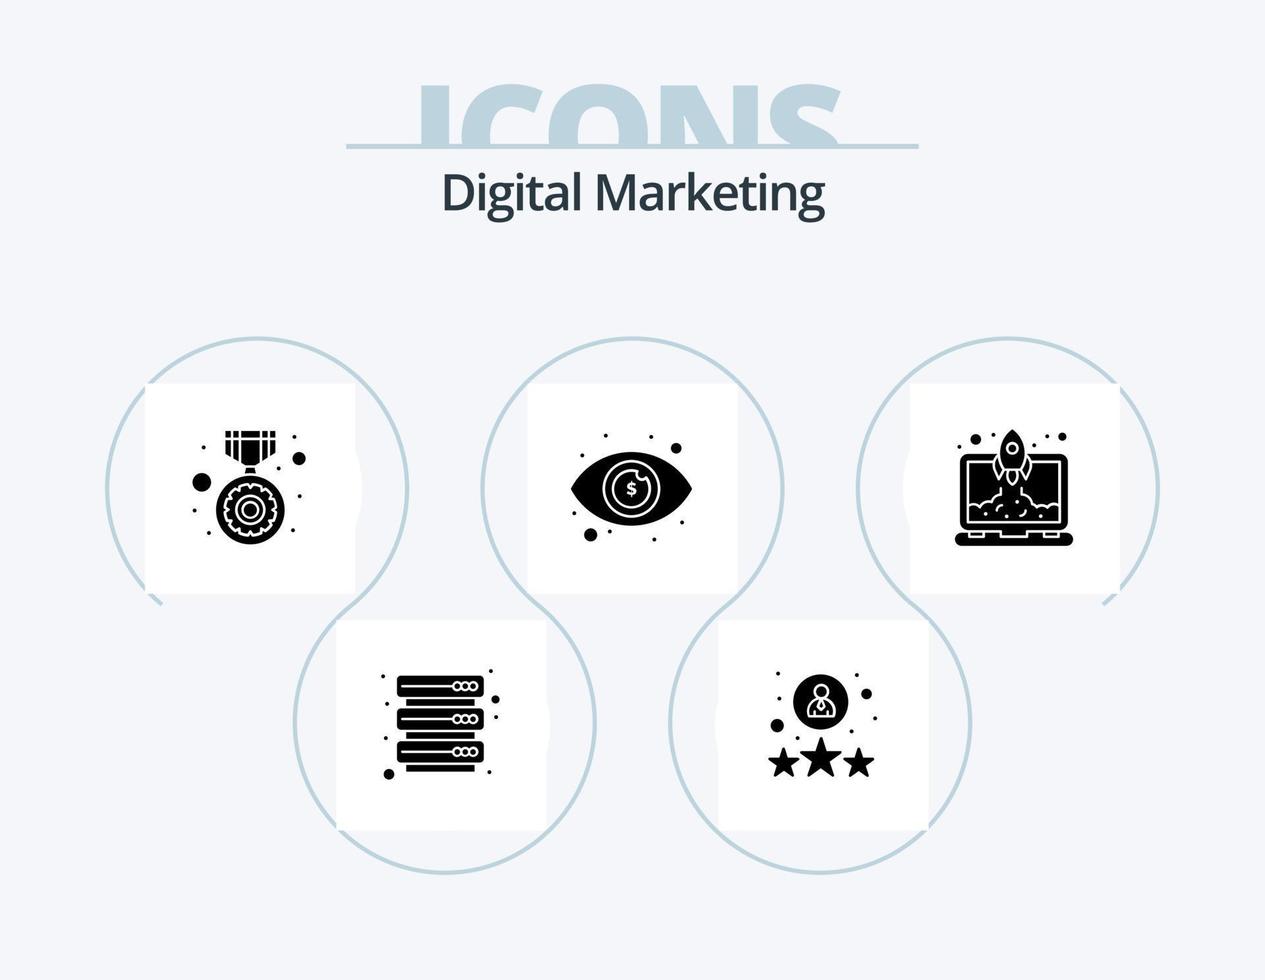 Digital Marketing Glyph Icon Pack 5 Icon Design. product. eye. license. dollar eye. business view vector